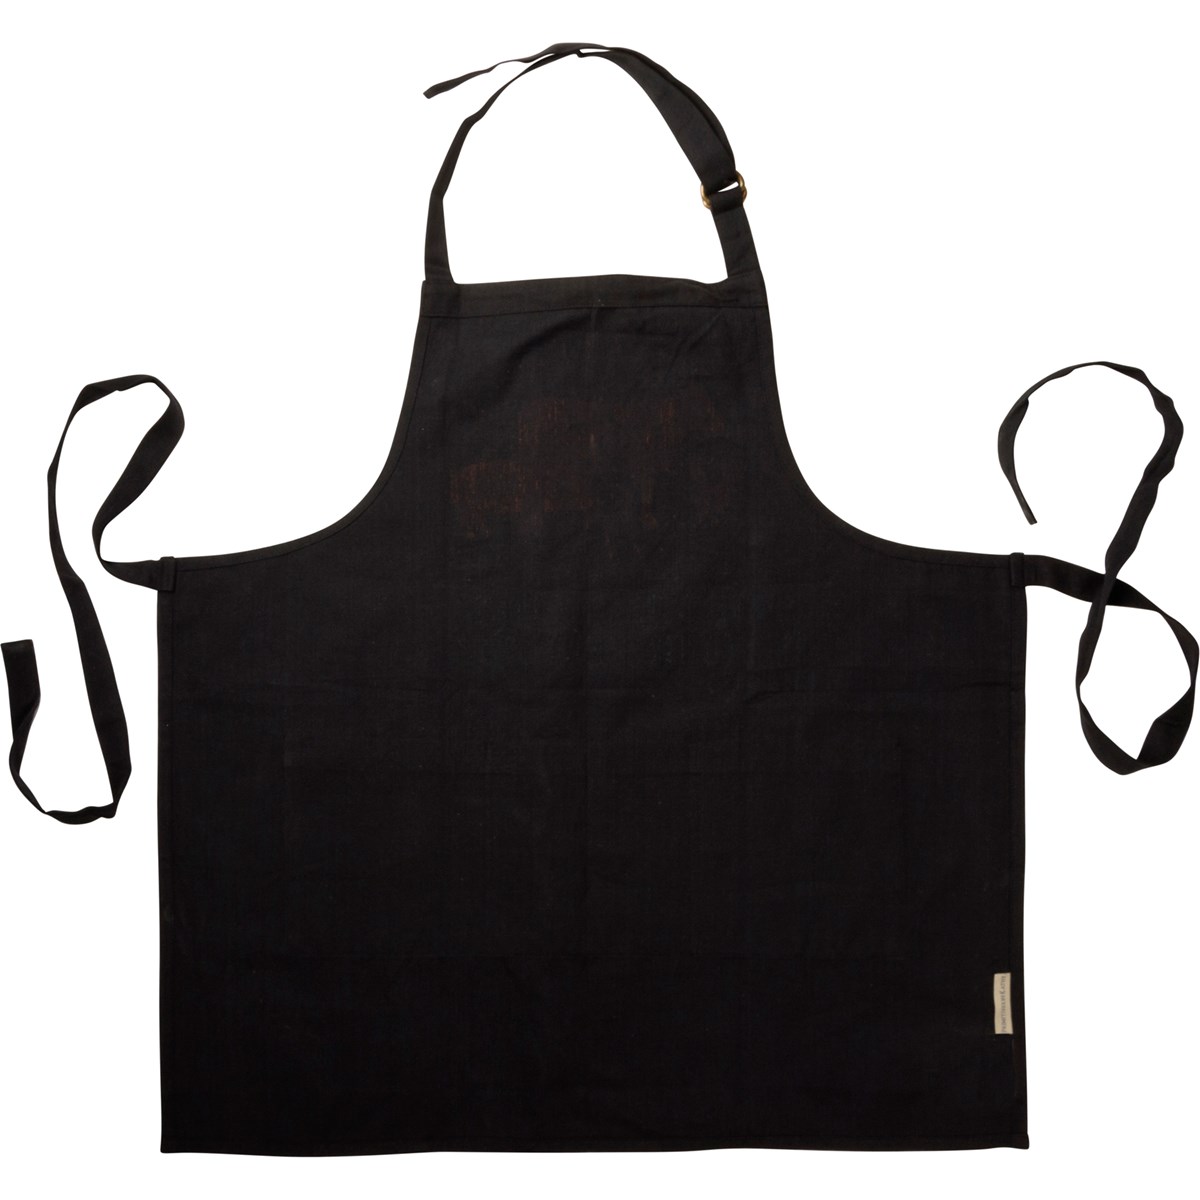 This Is Going To Be Delicious Apron - Cotton, Metal